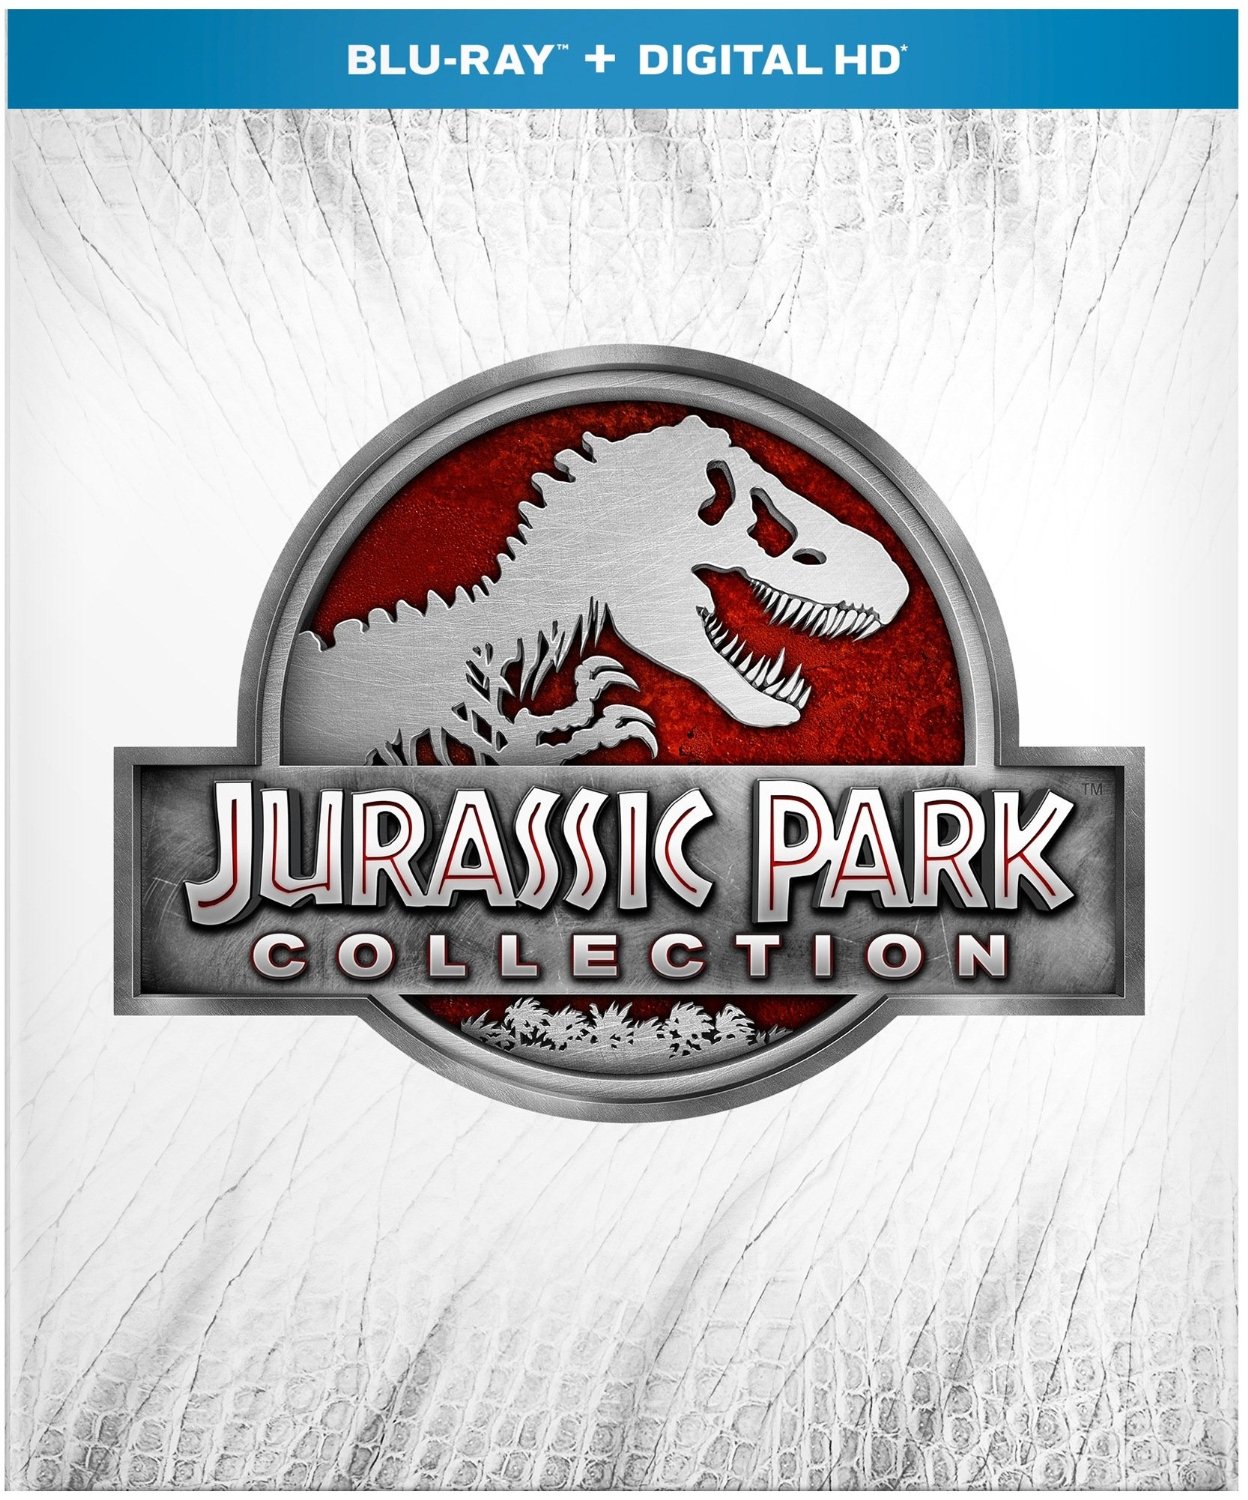 Jurassic Park Collection Coming to Blu-Ray and Digital HD